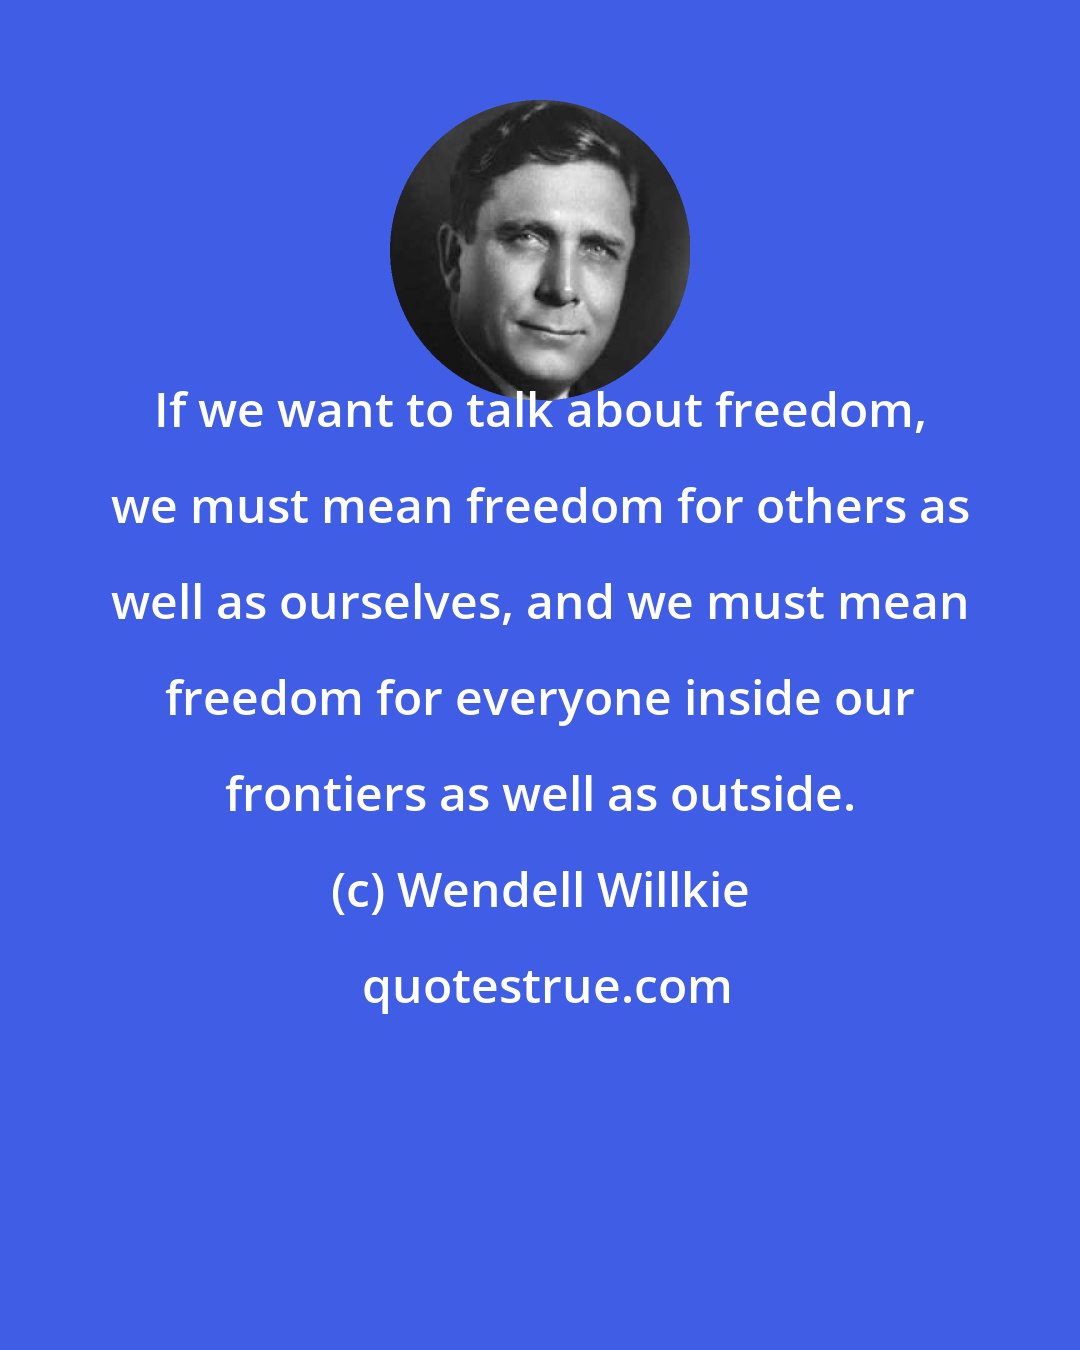 Wendell Willkie: If we want to talk about freedom, we must mean freedom for others as well as ourselves, and we must mean freedom for everyone inside our frontiers as well as outside.